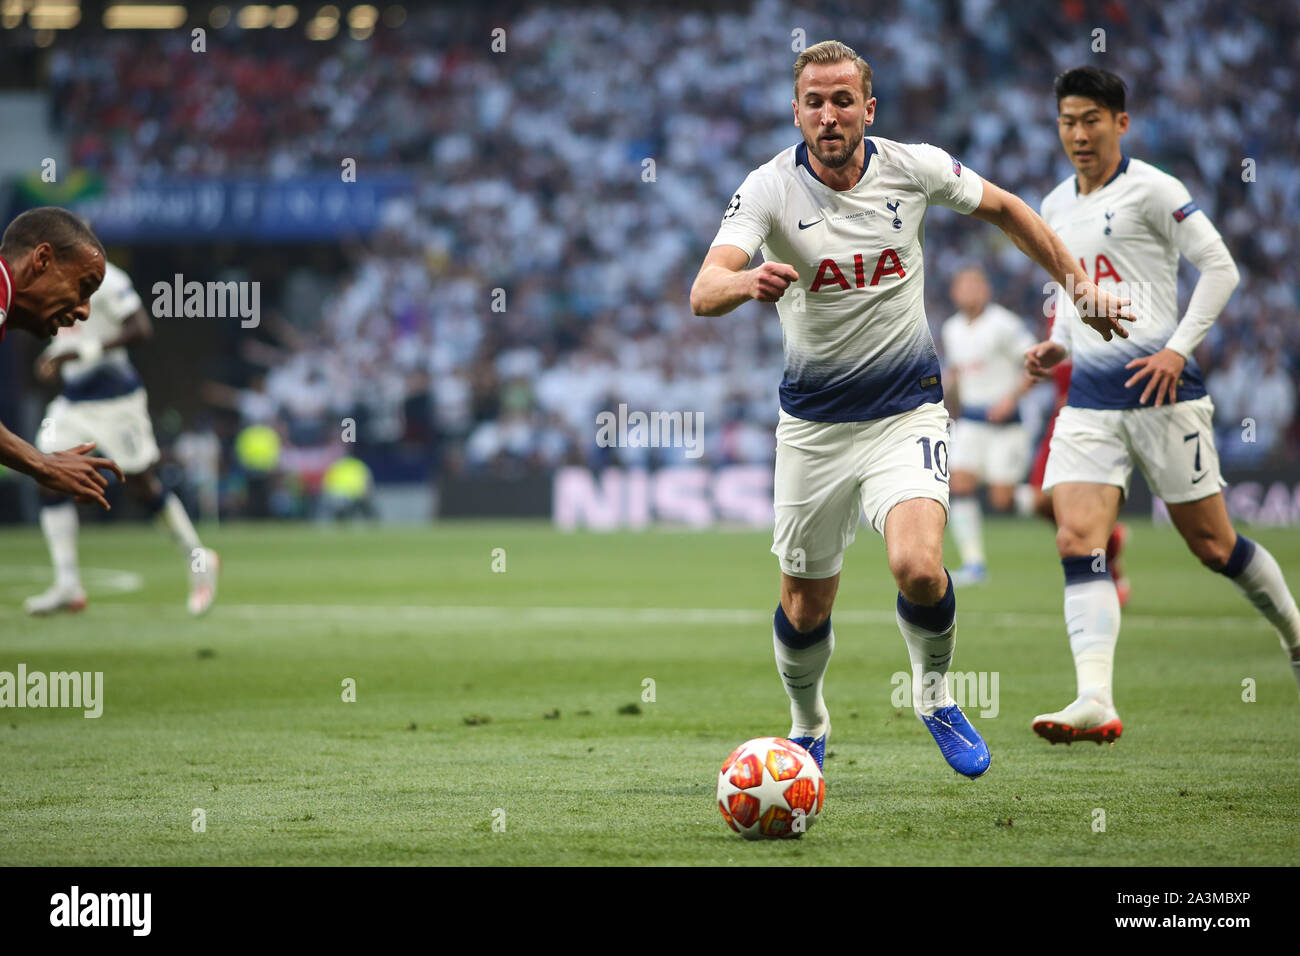 MADRID, SPAIN - JUNE 01, 2019: Harry Kane (Tottenham) pictured during the final of the 2019/20 UEFA Champions League Final. Stock Photo